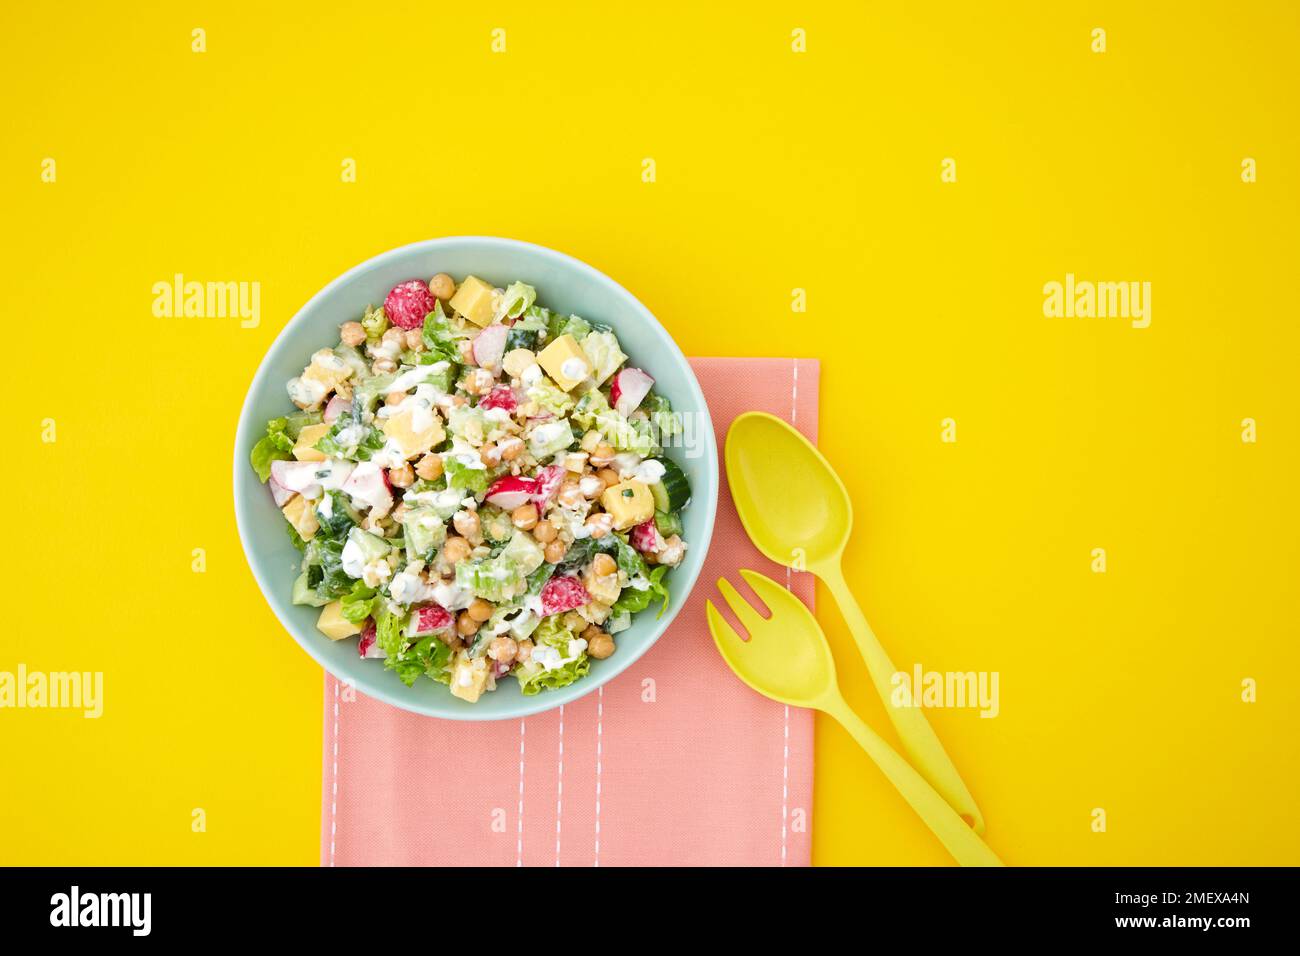 Chopped salad arranged overhead on yellow background with salad servers Stock Photo